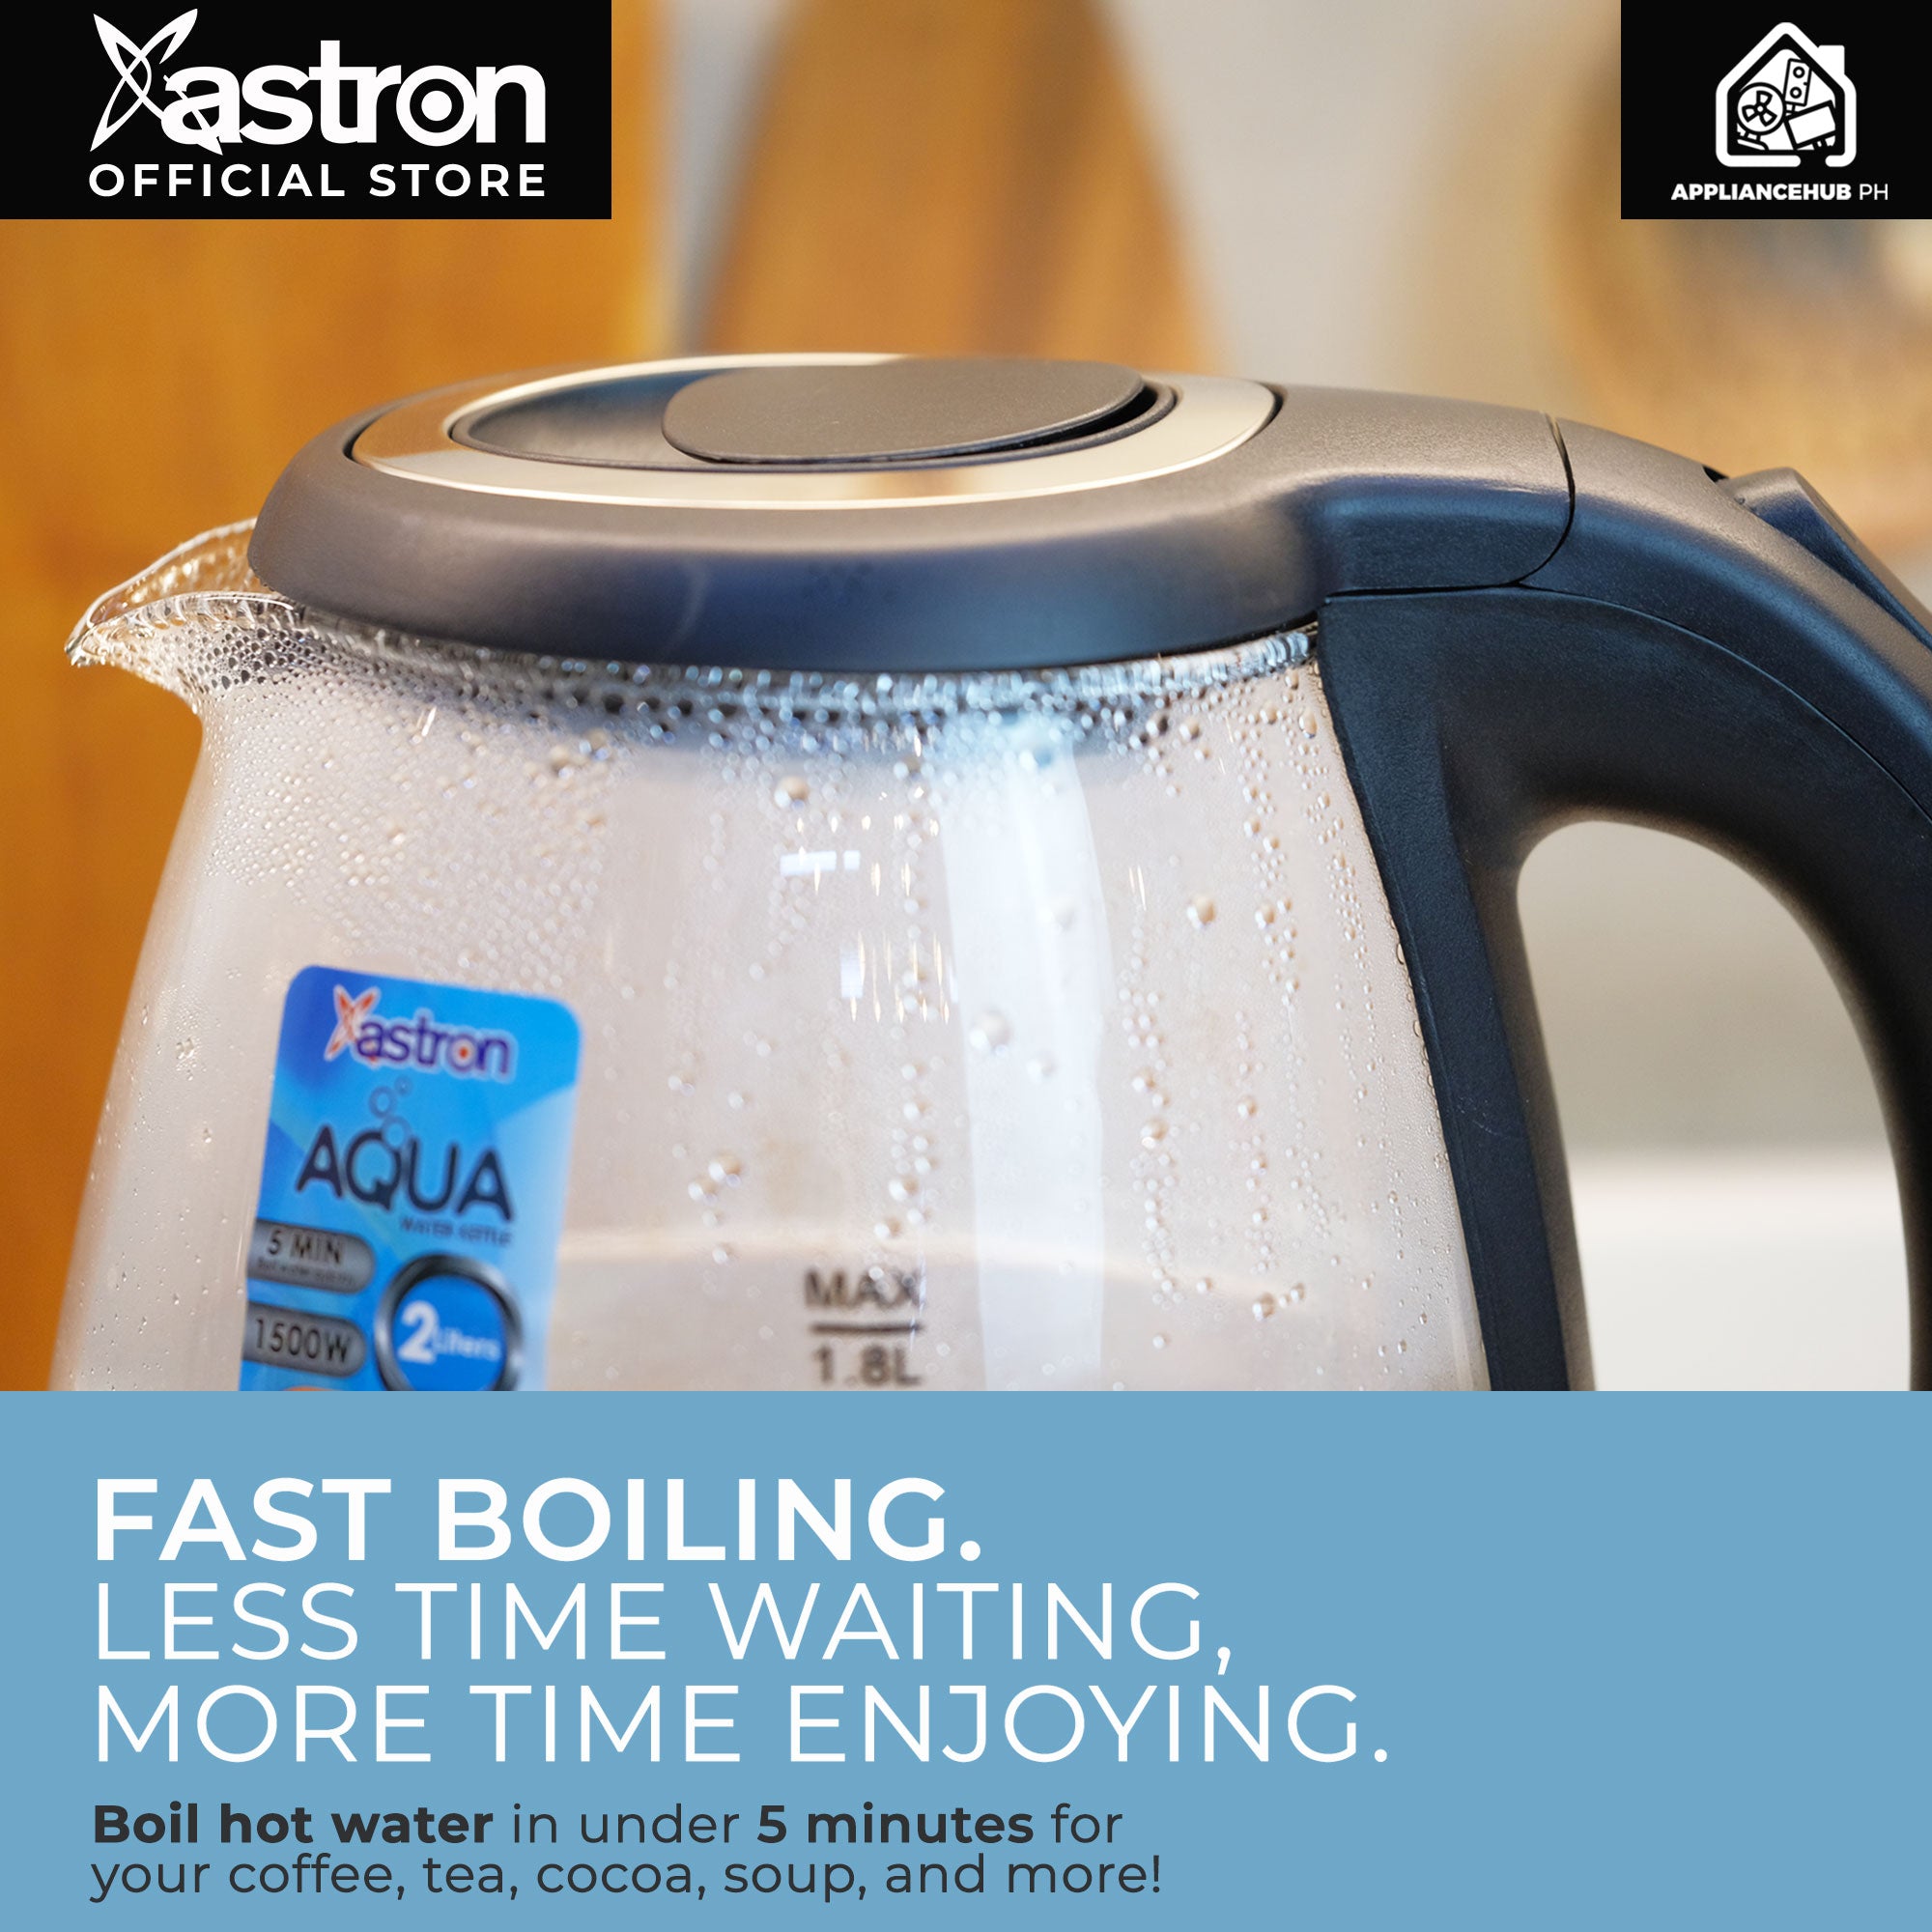 ASTRON AQUA Electric Glass Kettle with LED Light (1.8L) (1500W) | Fast boiling Astron